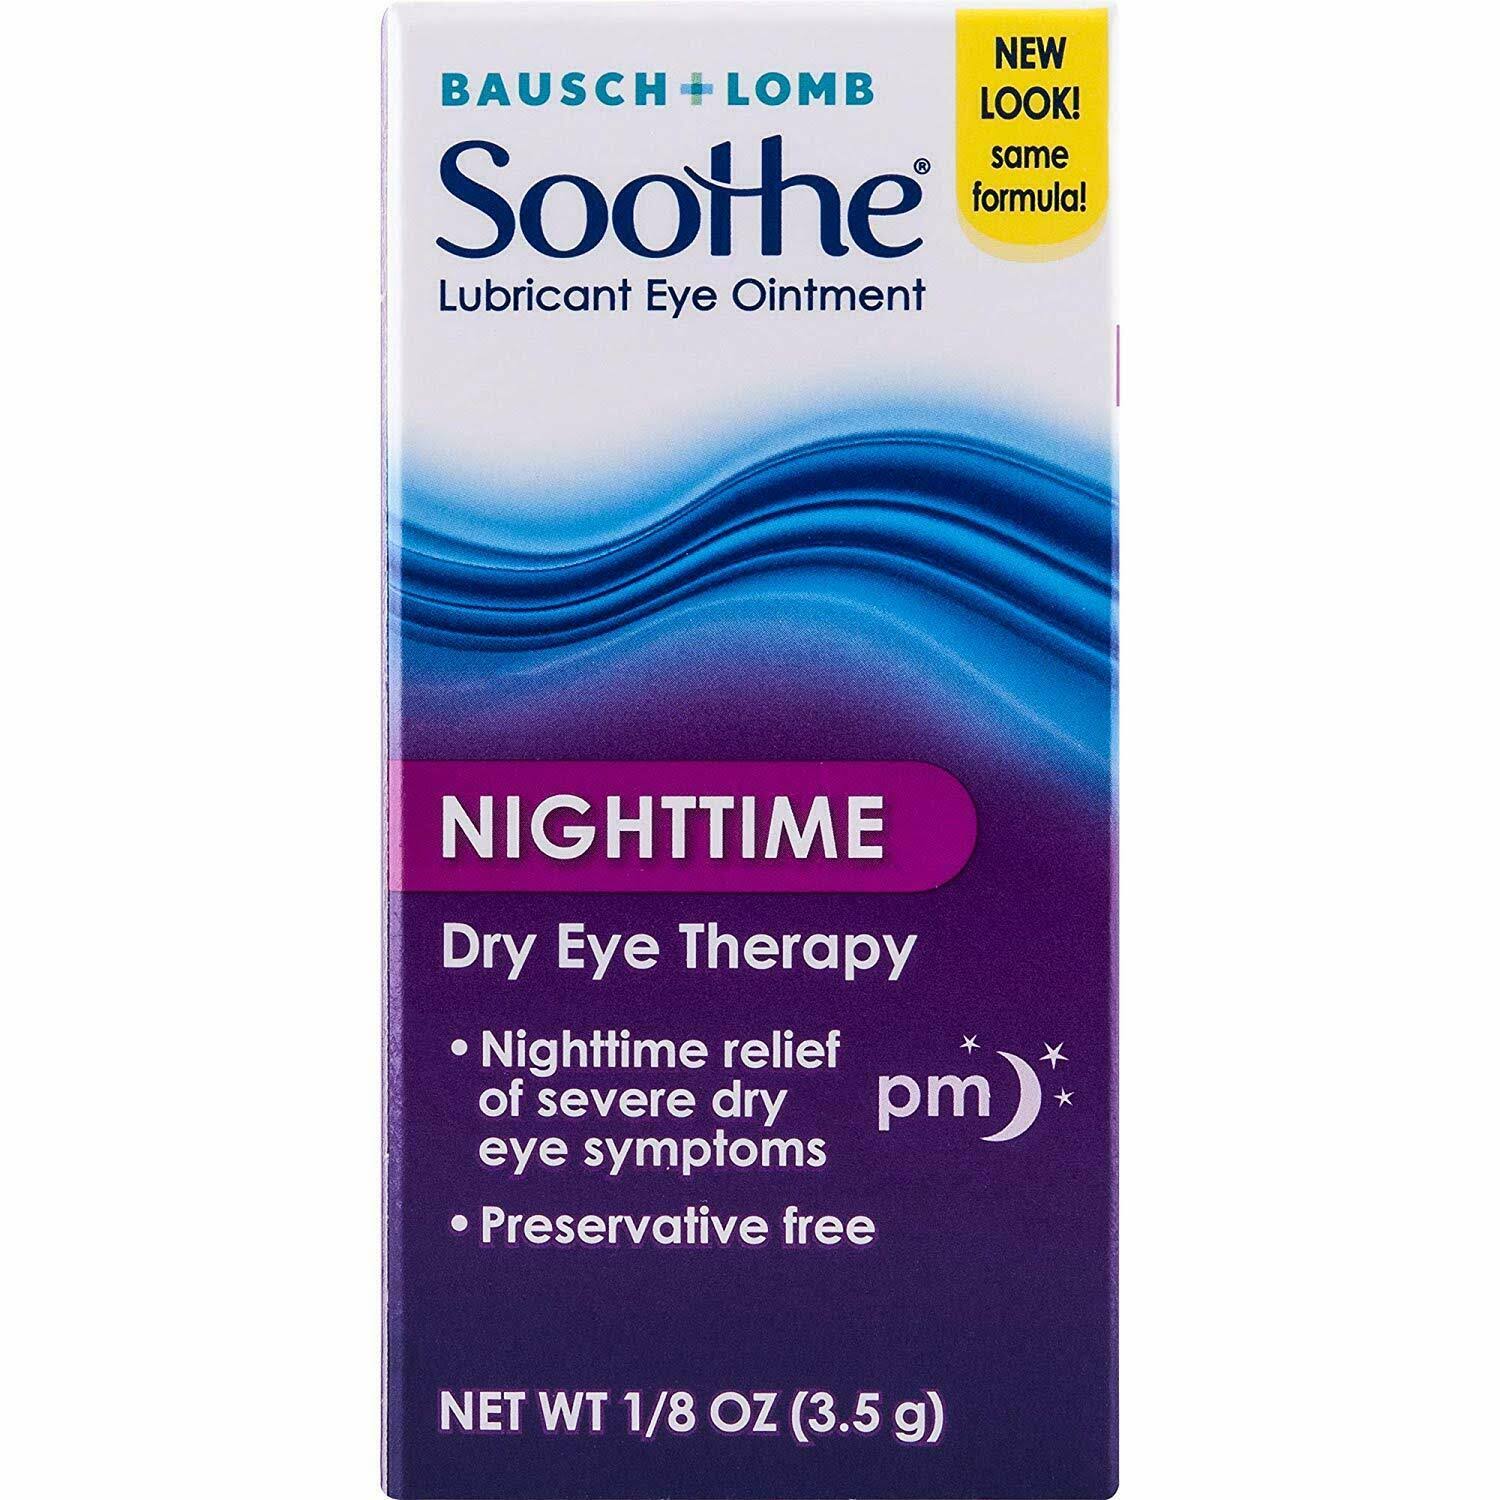 Bausch + Lomb Soothe Lubricant Eye Ointment - Night Time, 1/8oz